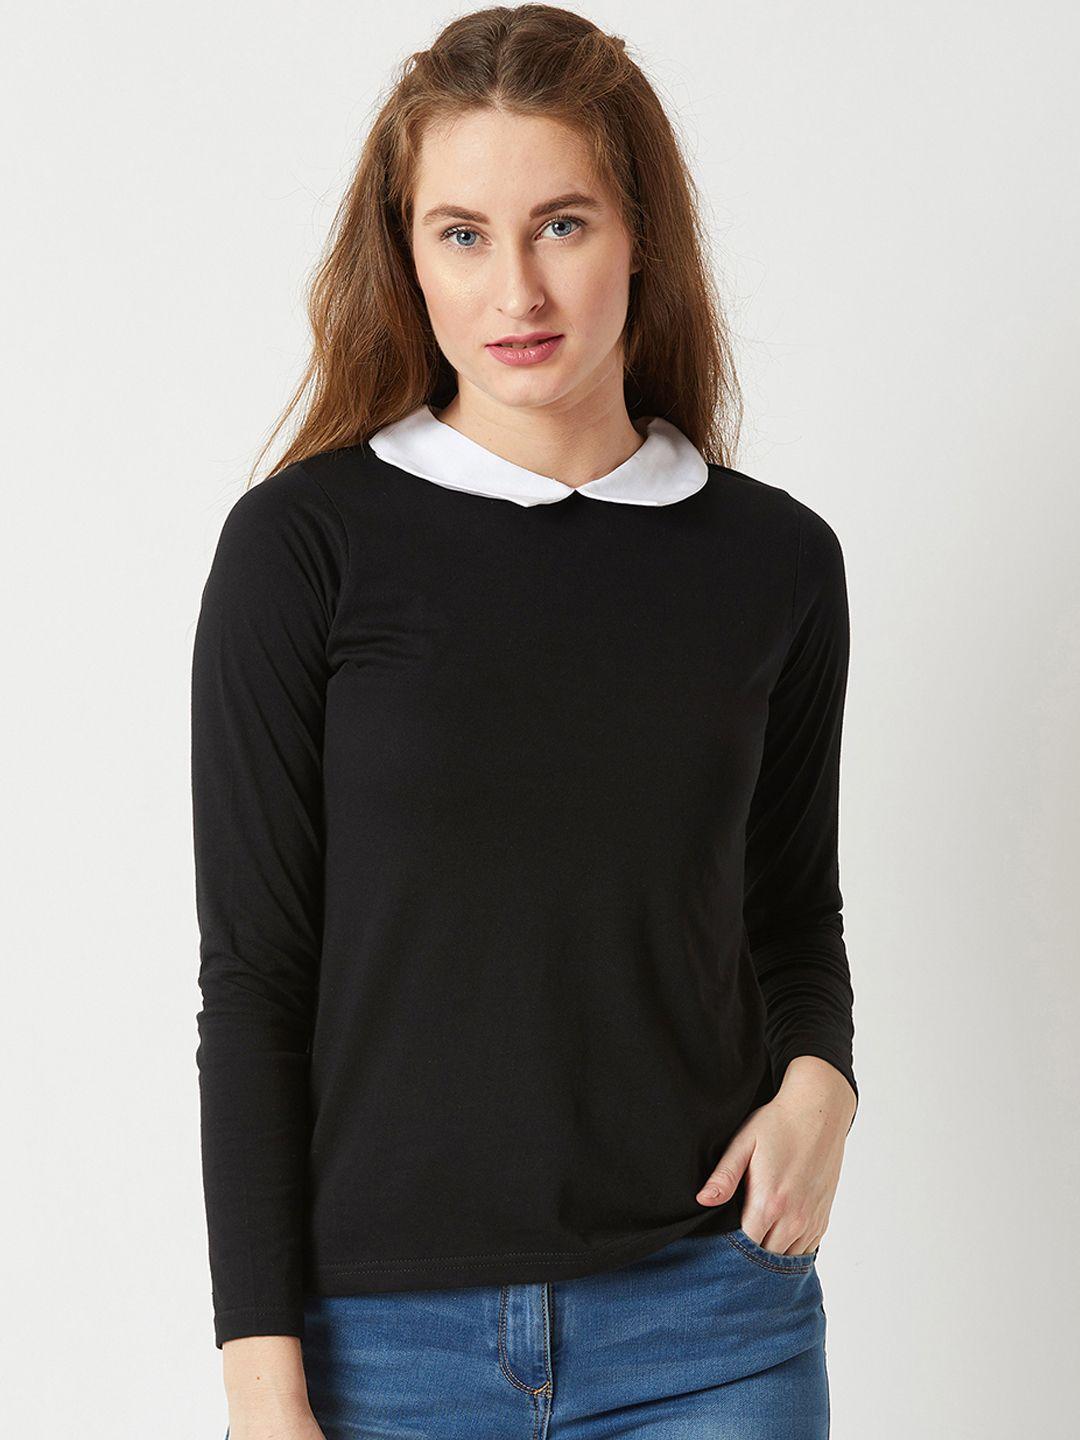 miss-chase-women-black-solid-shirt-style-pure-cotton-top